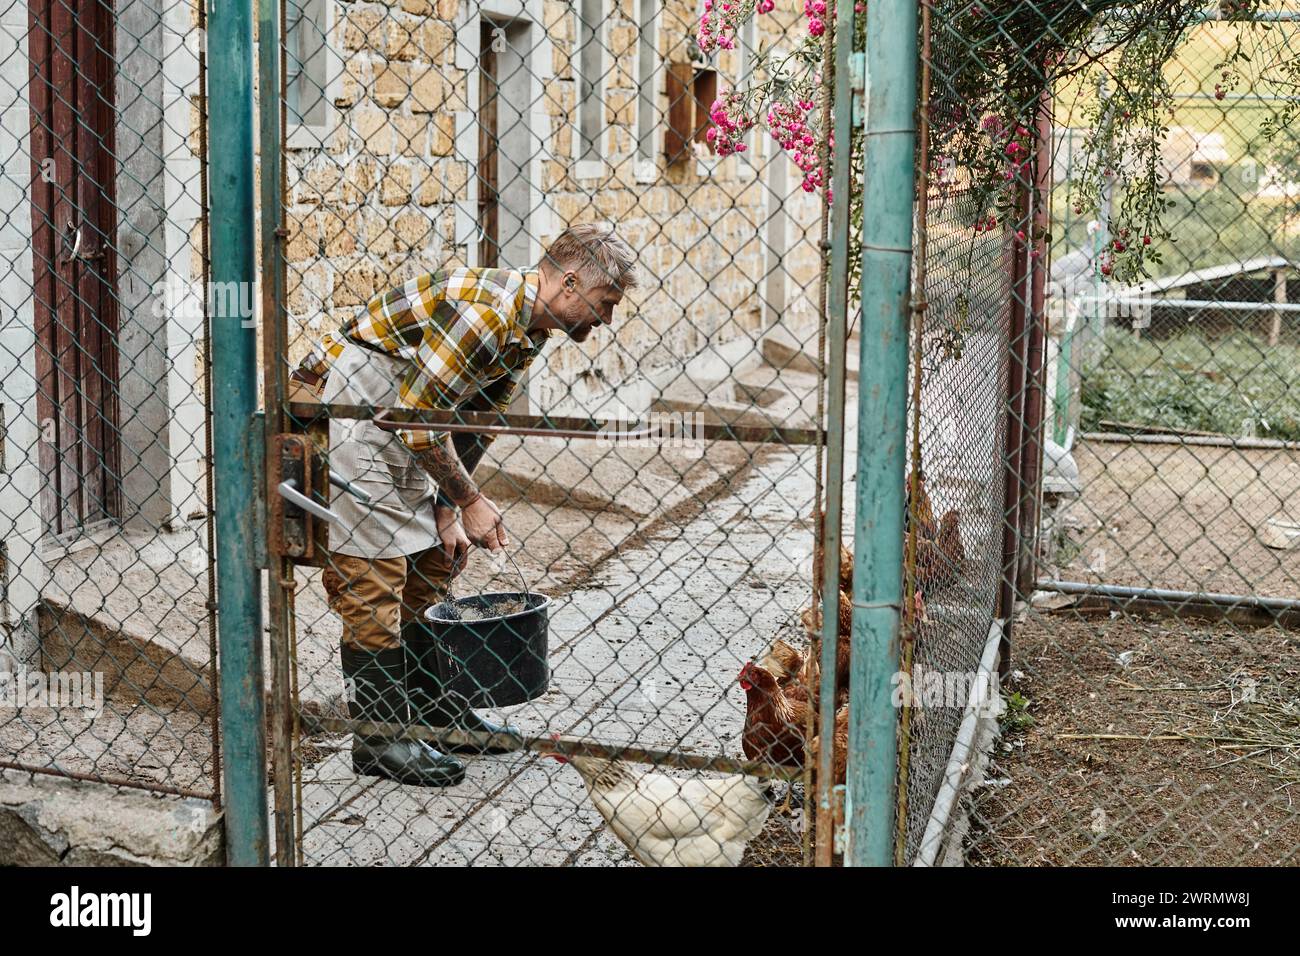 attractive hardworking man with tattoos feeding chickens in their aviary while on his farm Stock Photo